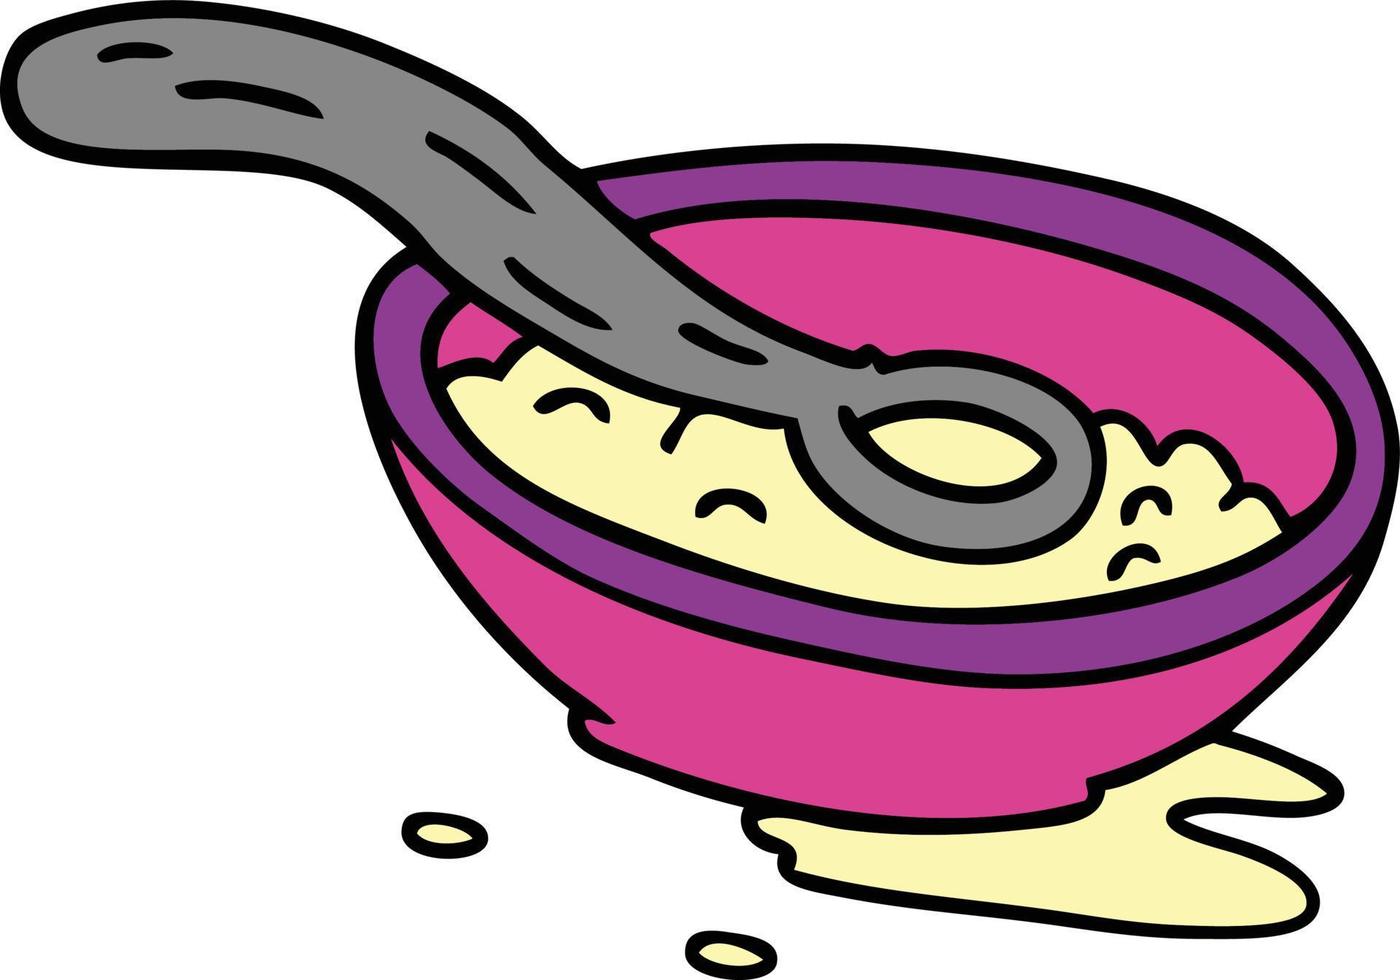 cartoon doodle of a cereal bowl vector